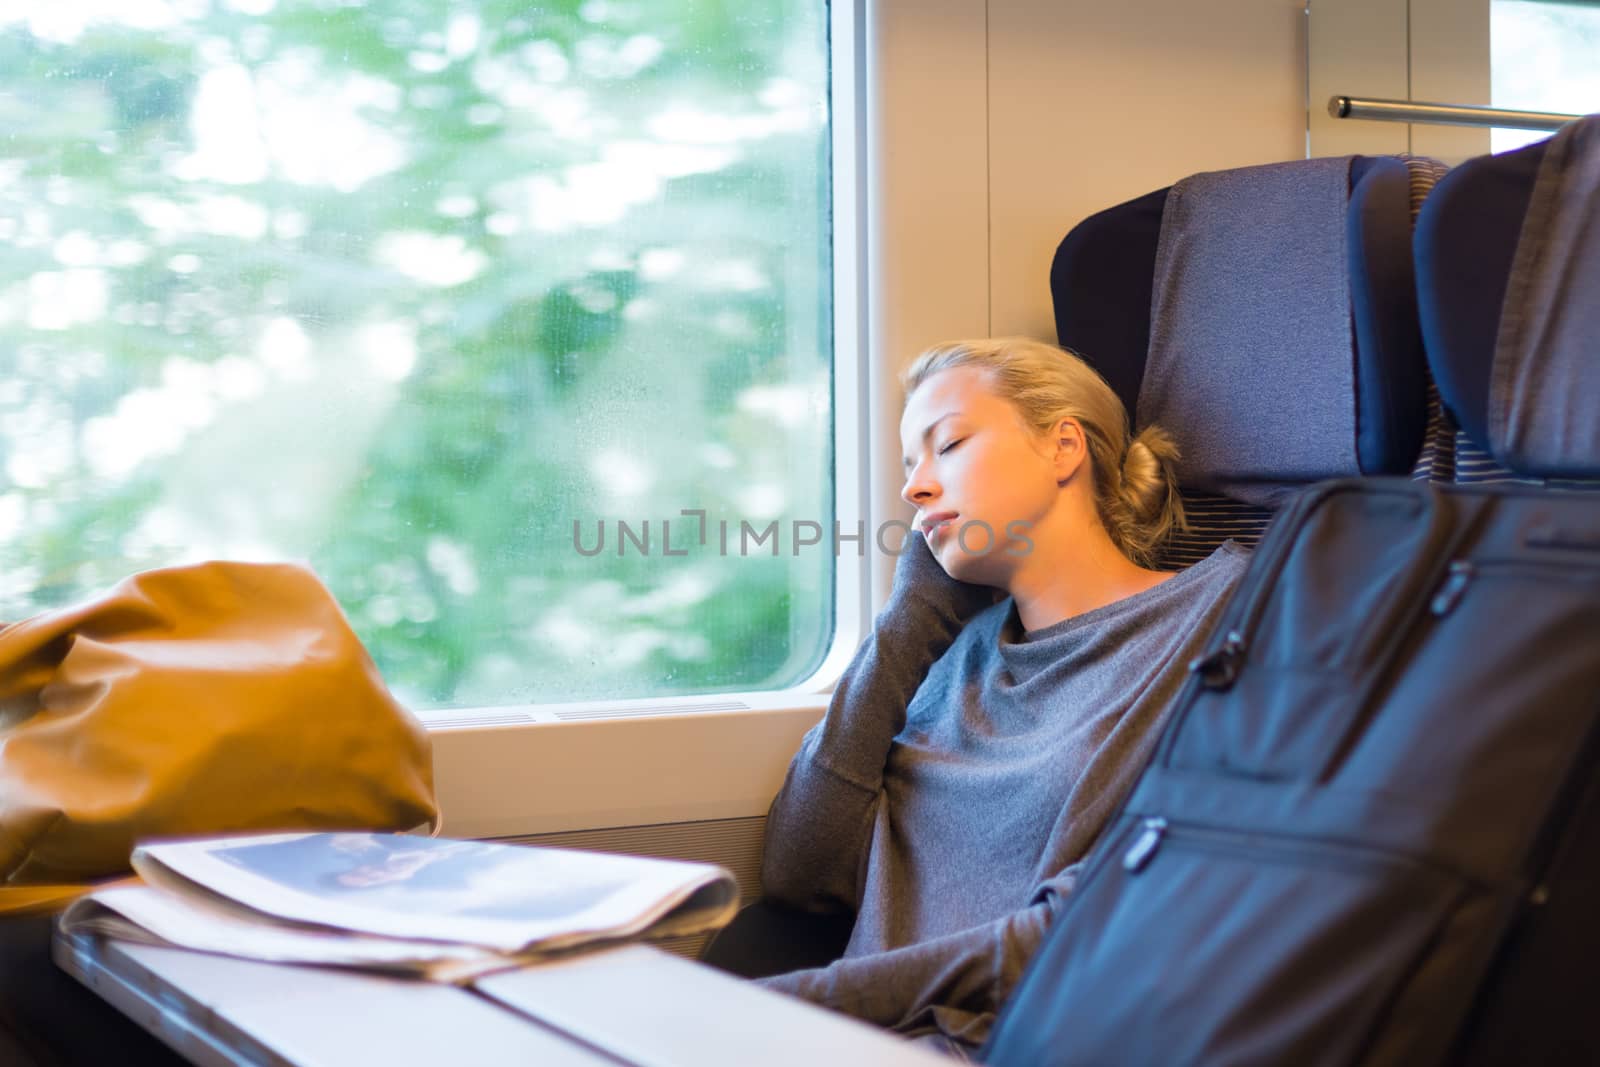 Lady traveling napping on a train. by kasto